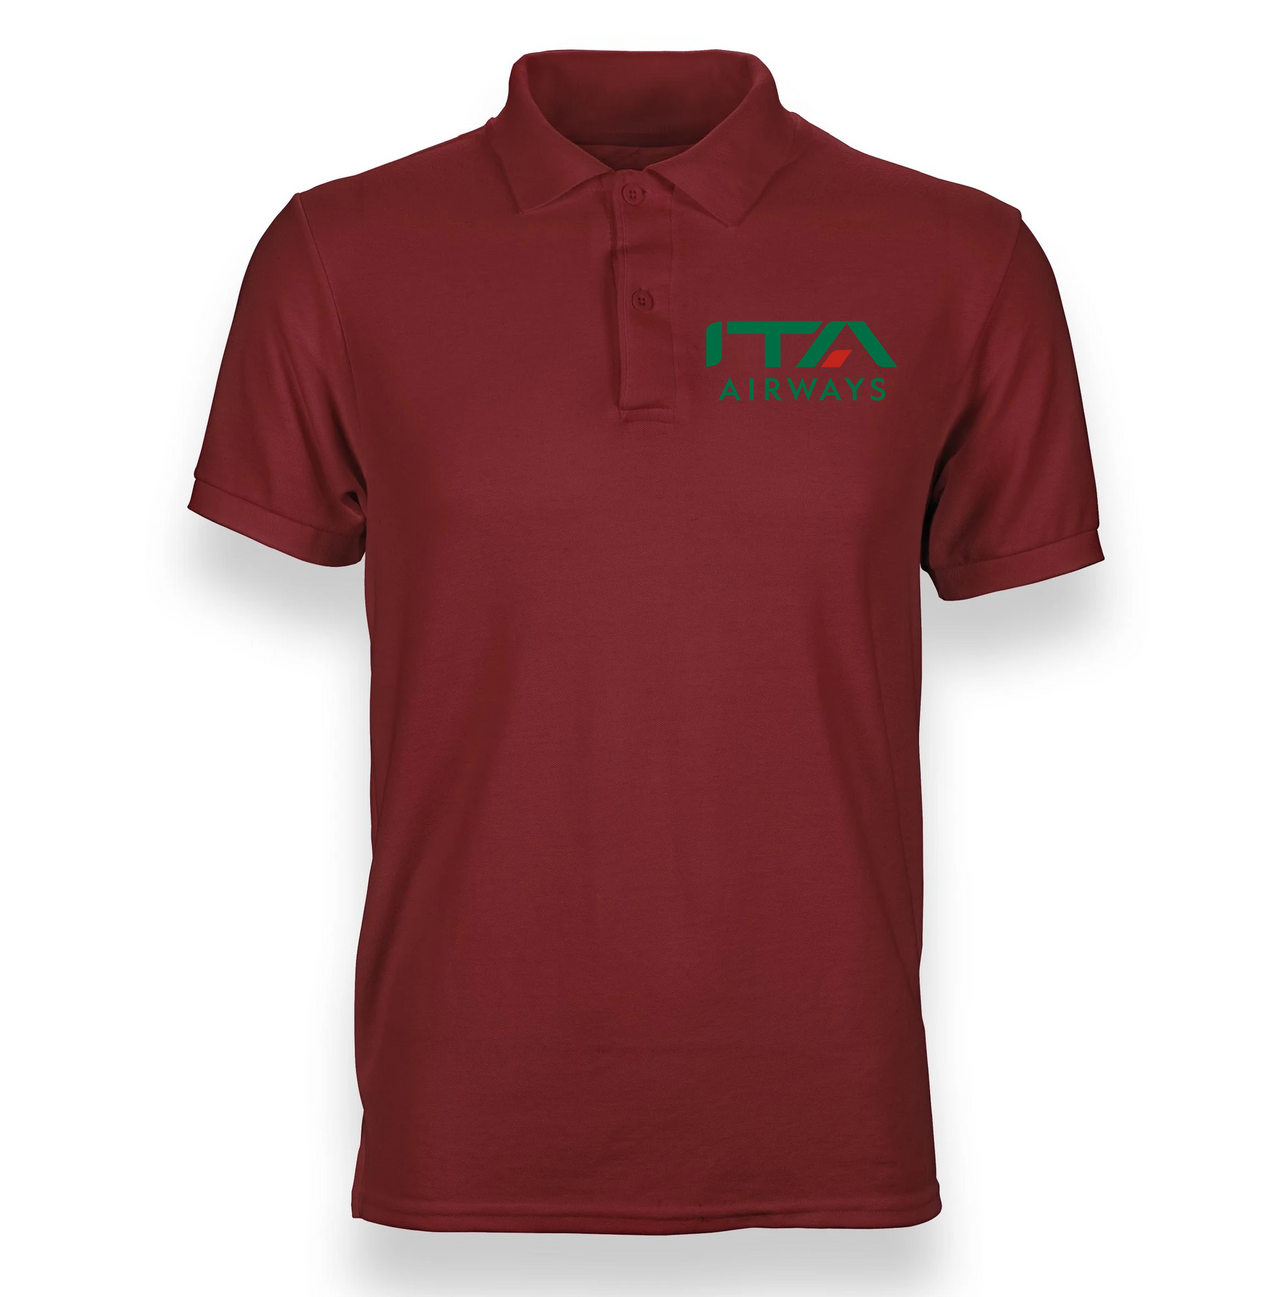 ITA AIRLINES POLO T-SHIRT